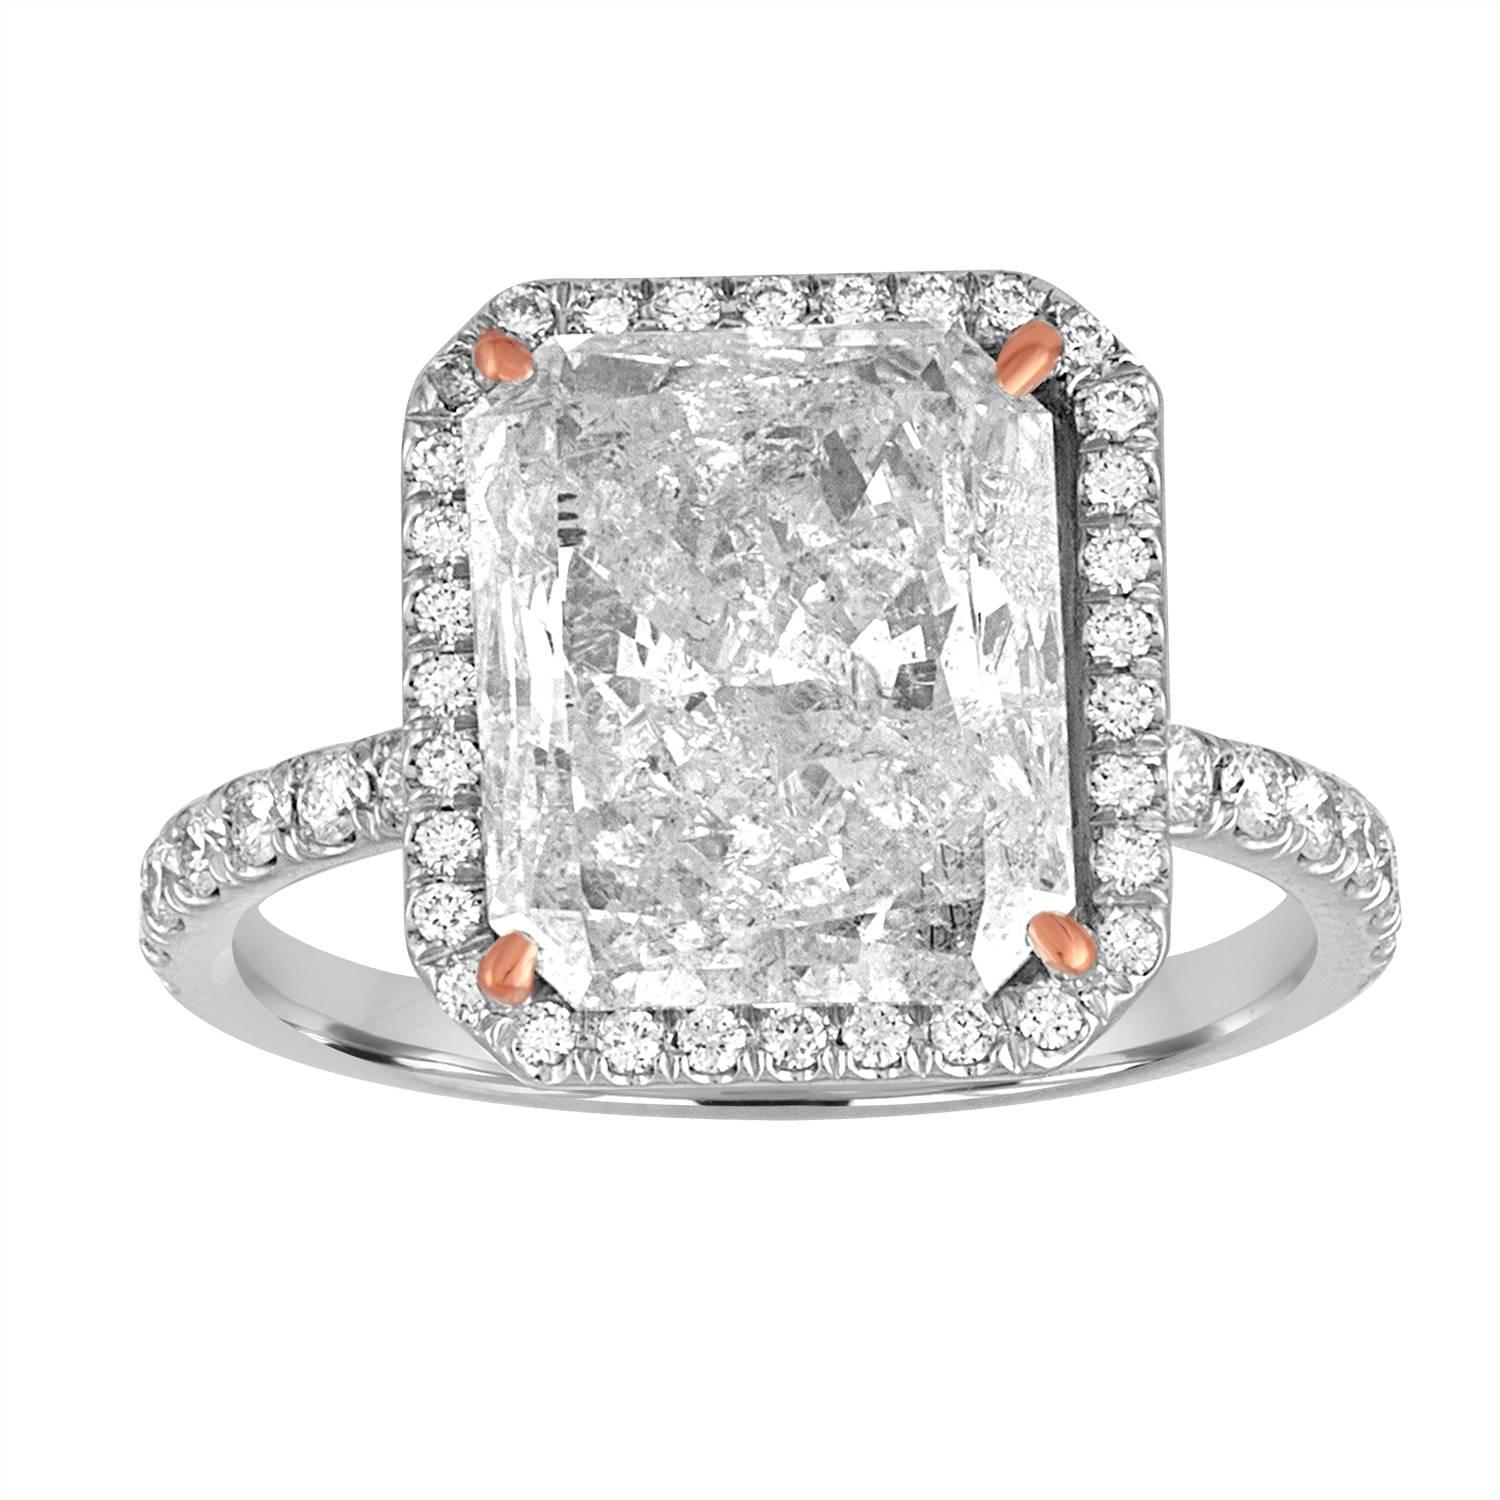 5.04 Carat Diamond Halo Two-Color Gold Ring In New Condition For Sale In New York, NY